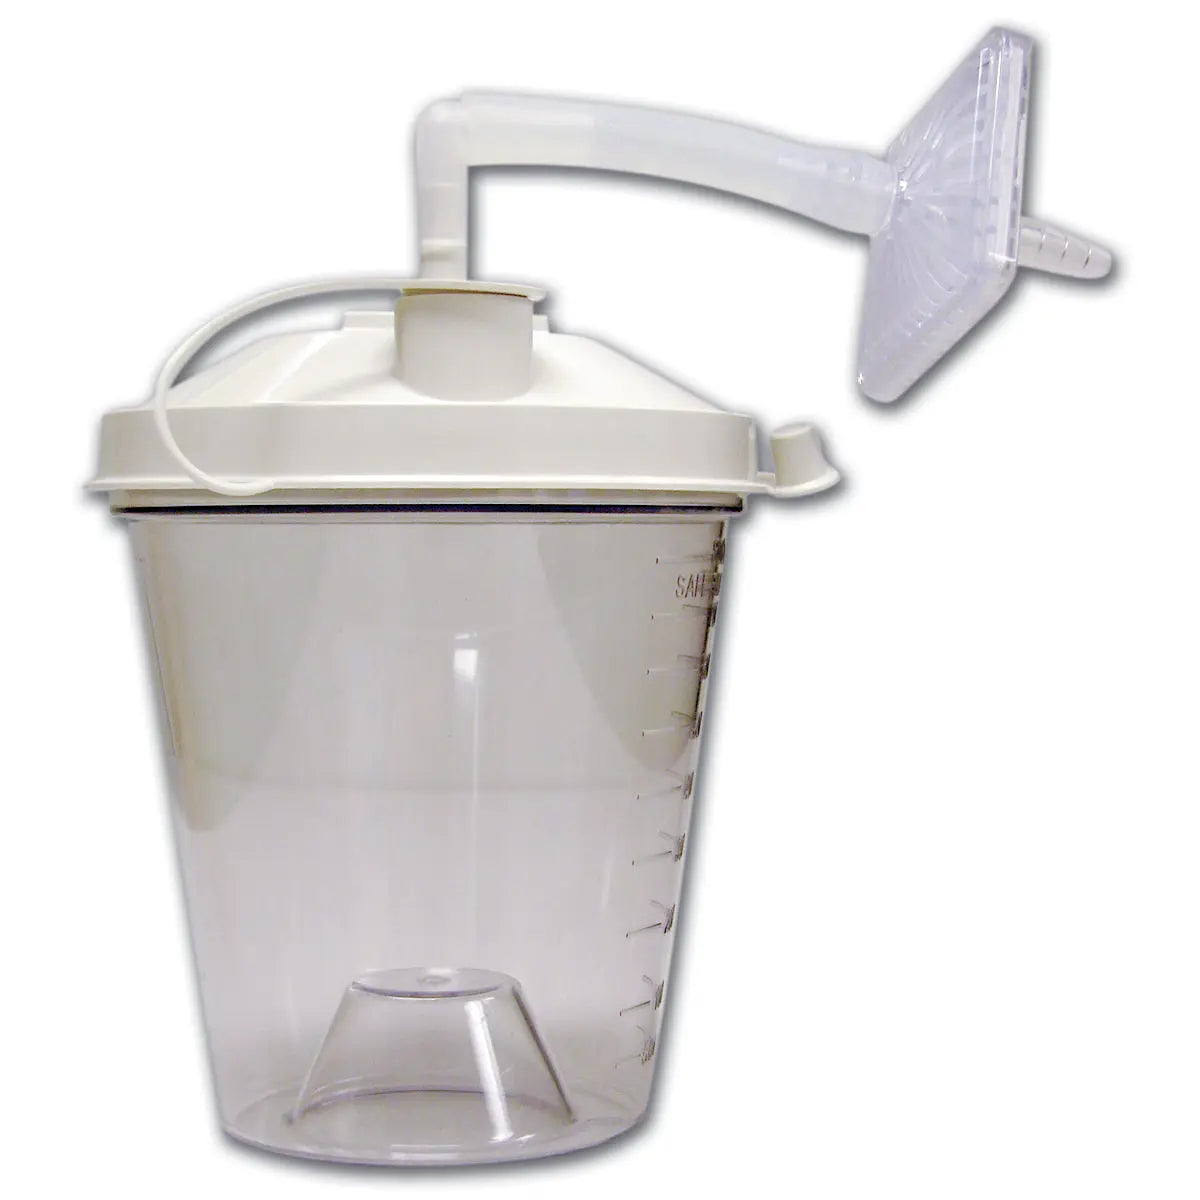 Case of 12 Disposable Suction Canisters, 800CC